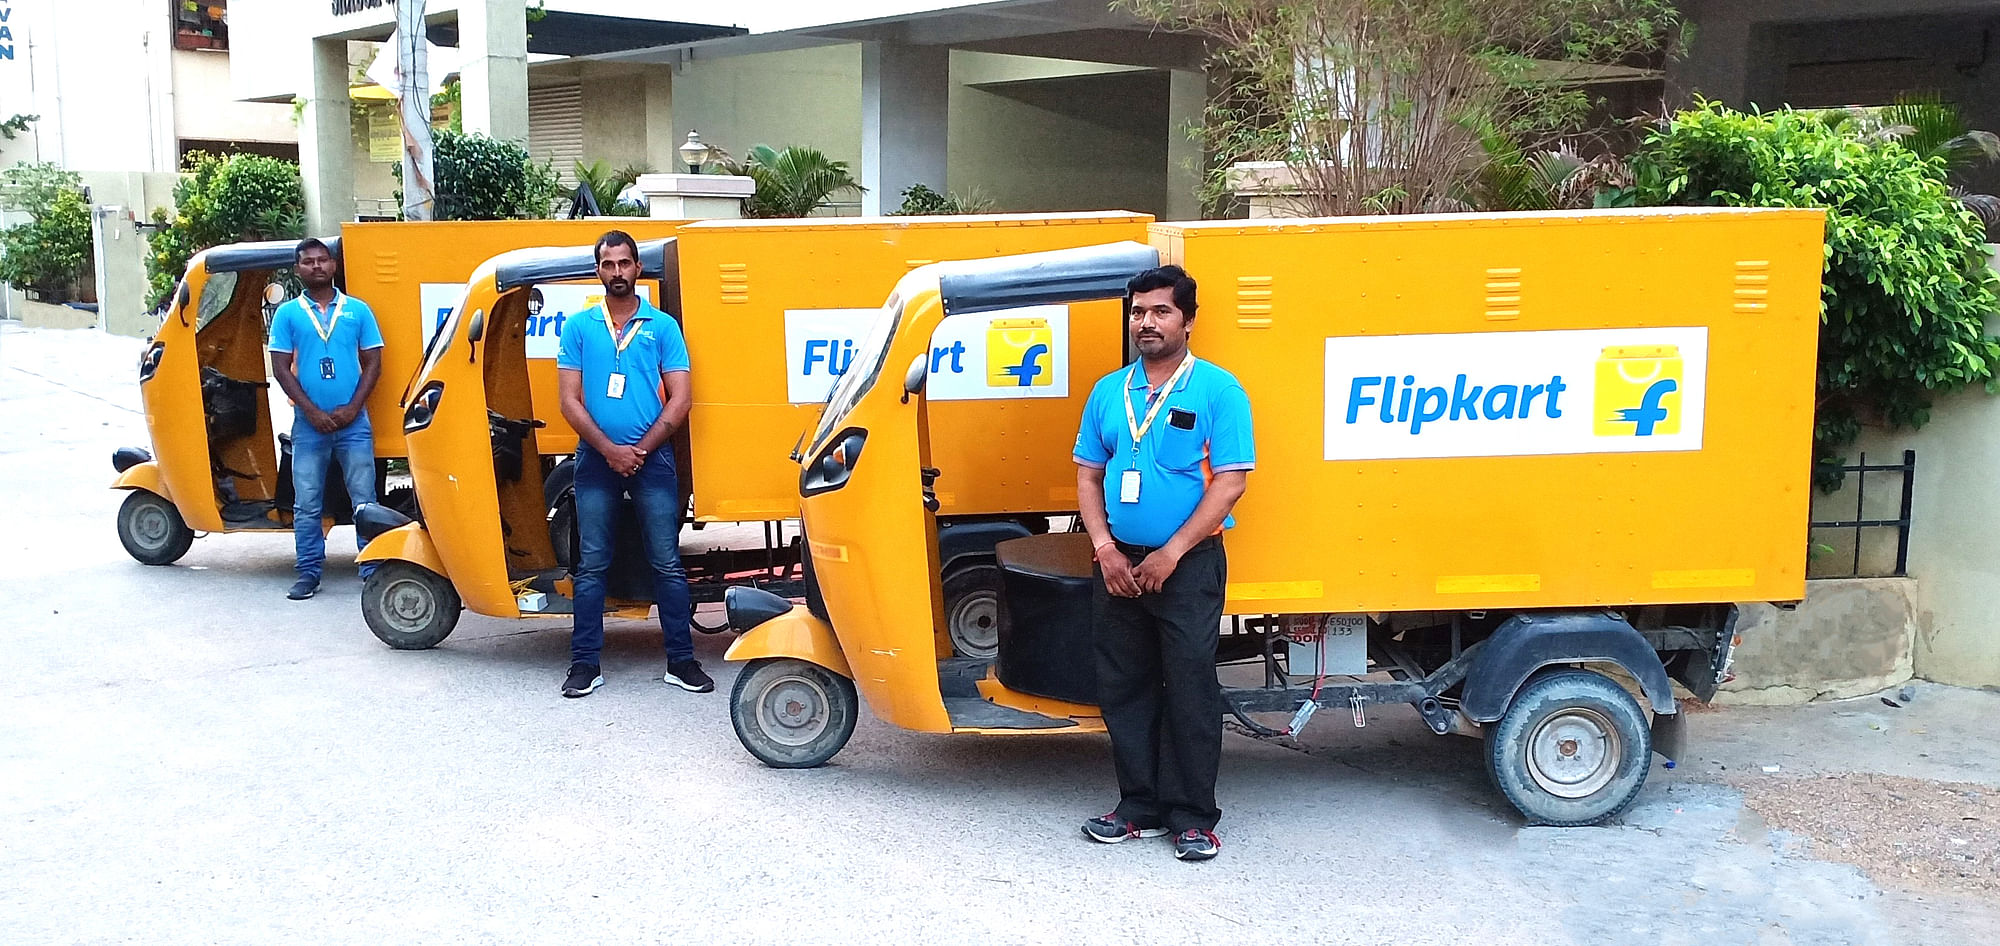 Most of your deliveries in Delhi will happen via three-wheelers like these.